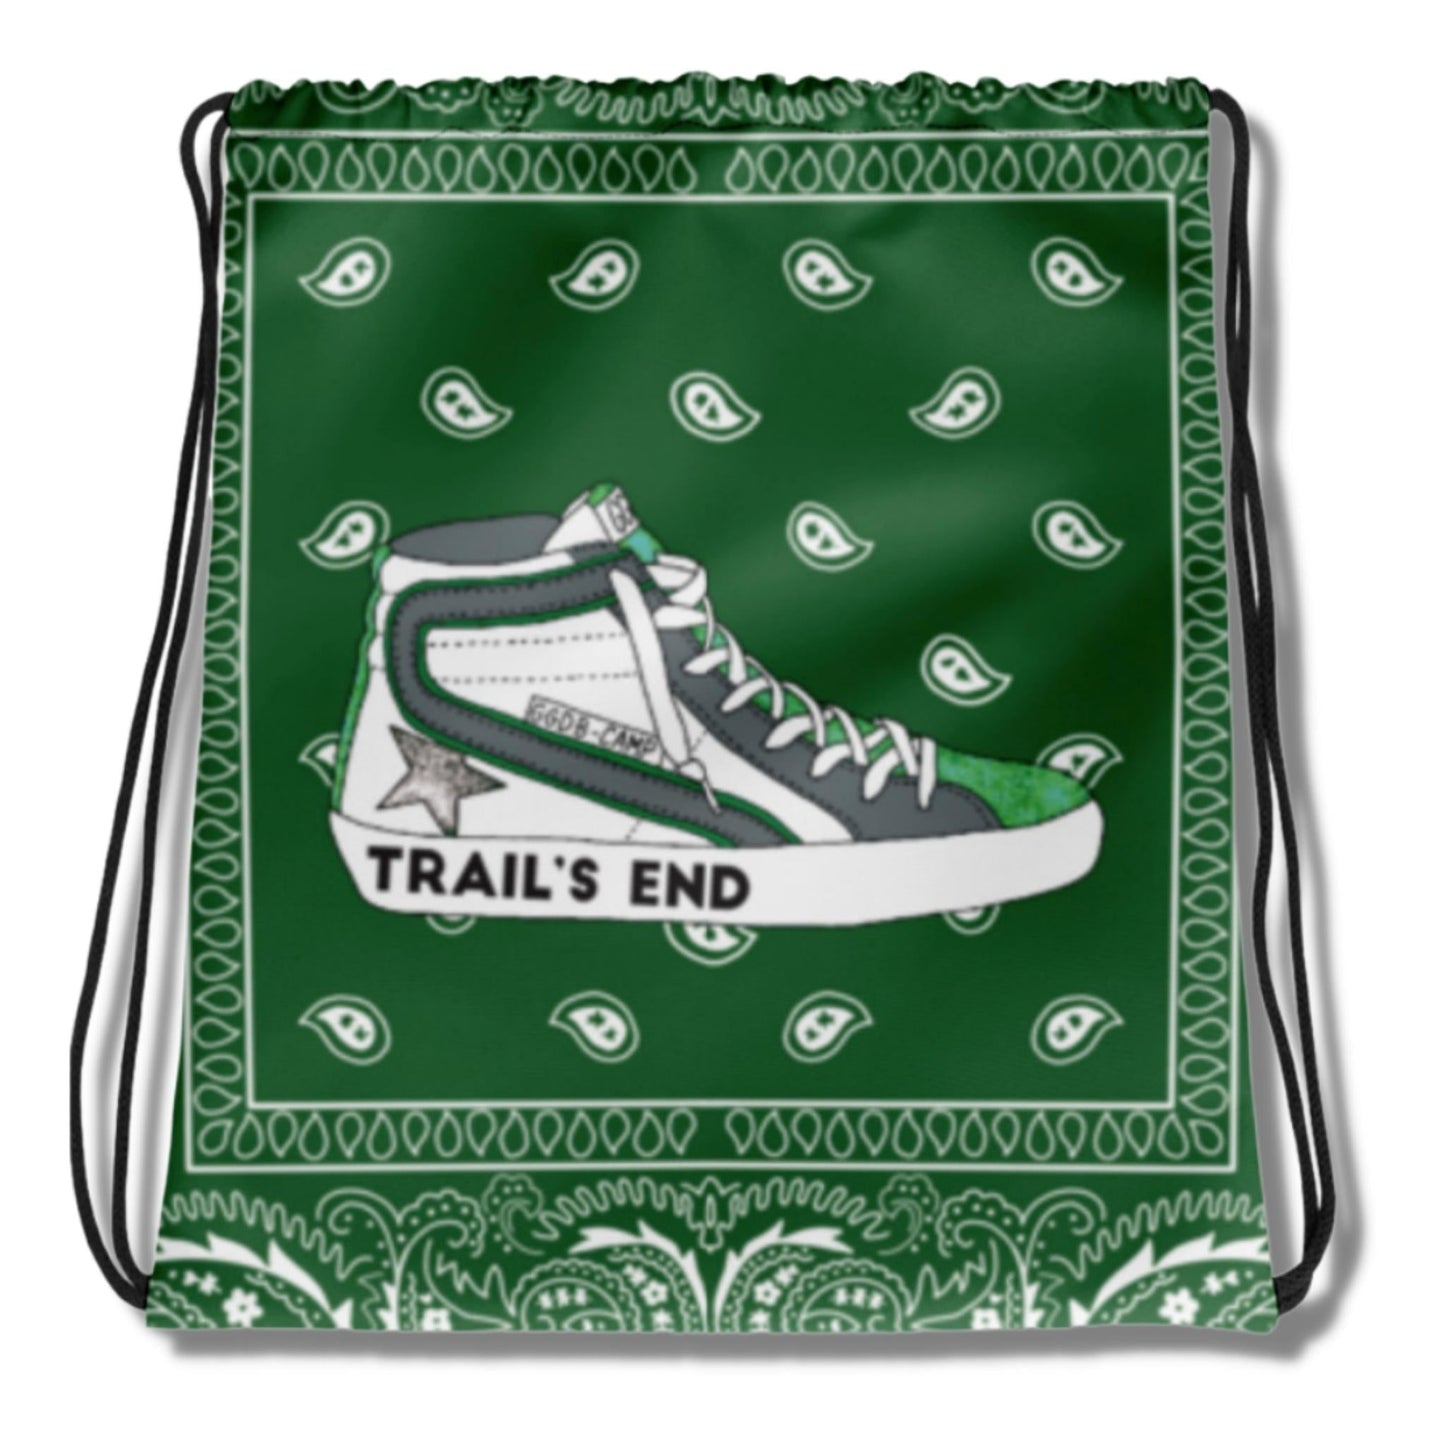 Custom Camp Logo Step in Repeat Style Drawstring Bags - a Spirit Animal - Bags $30-$60 $45-$60 accessories